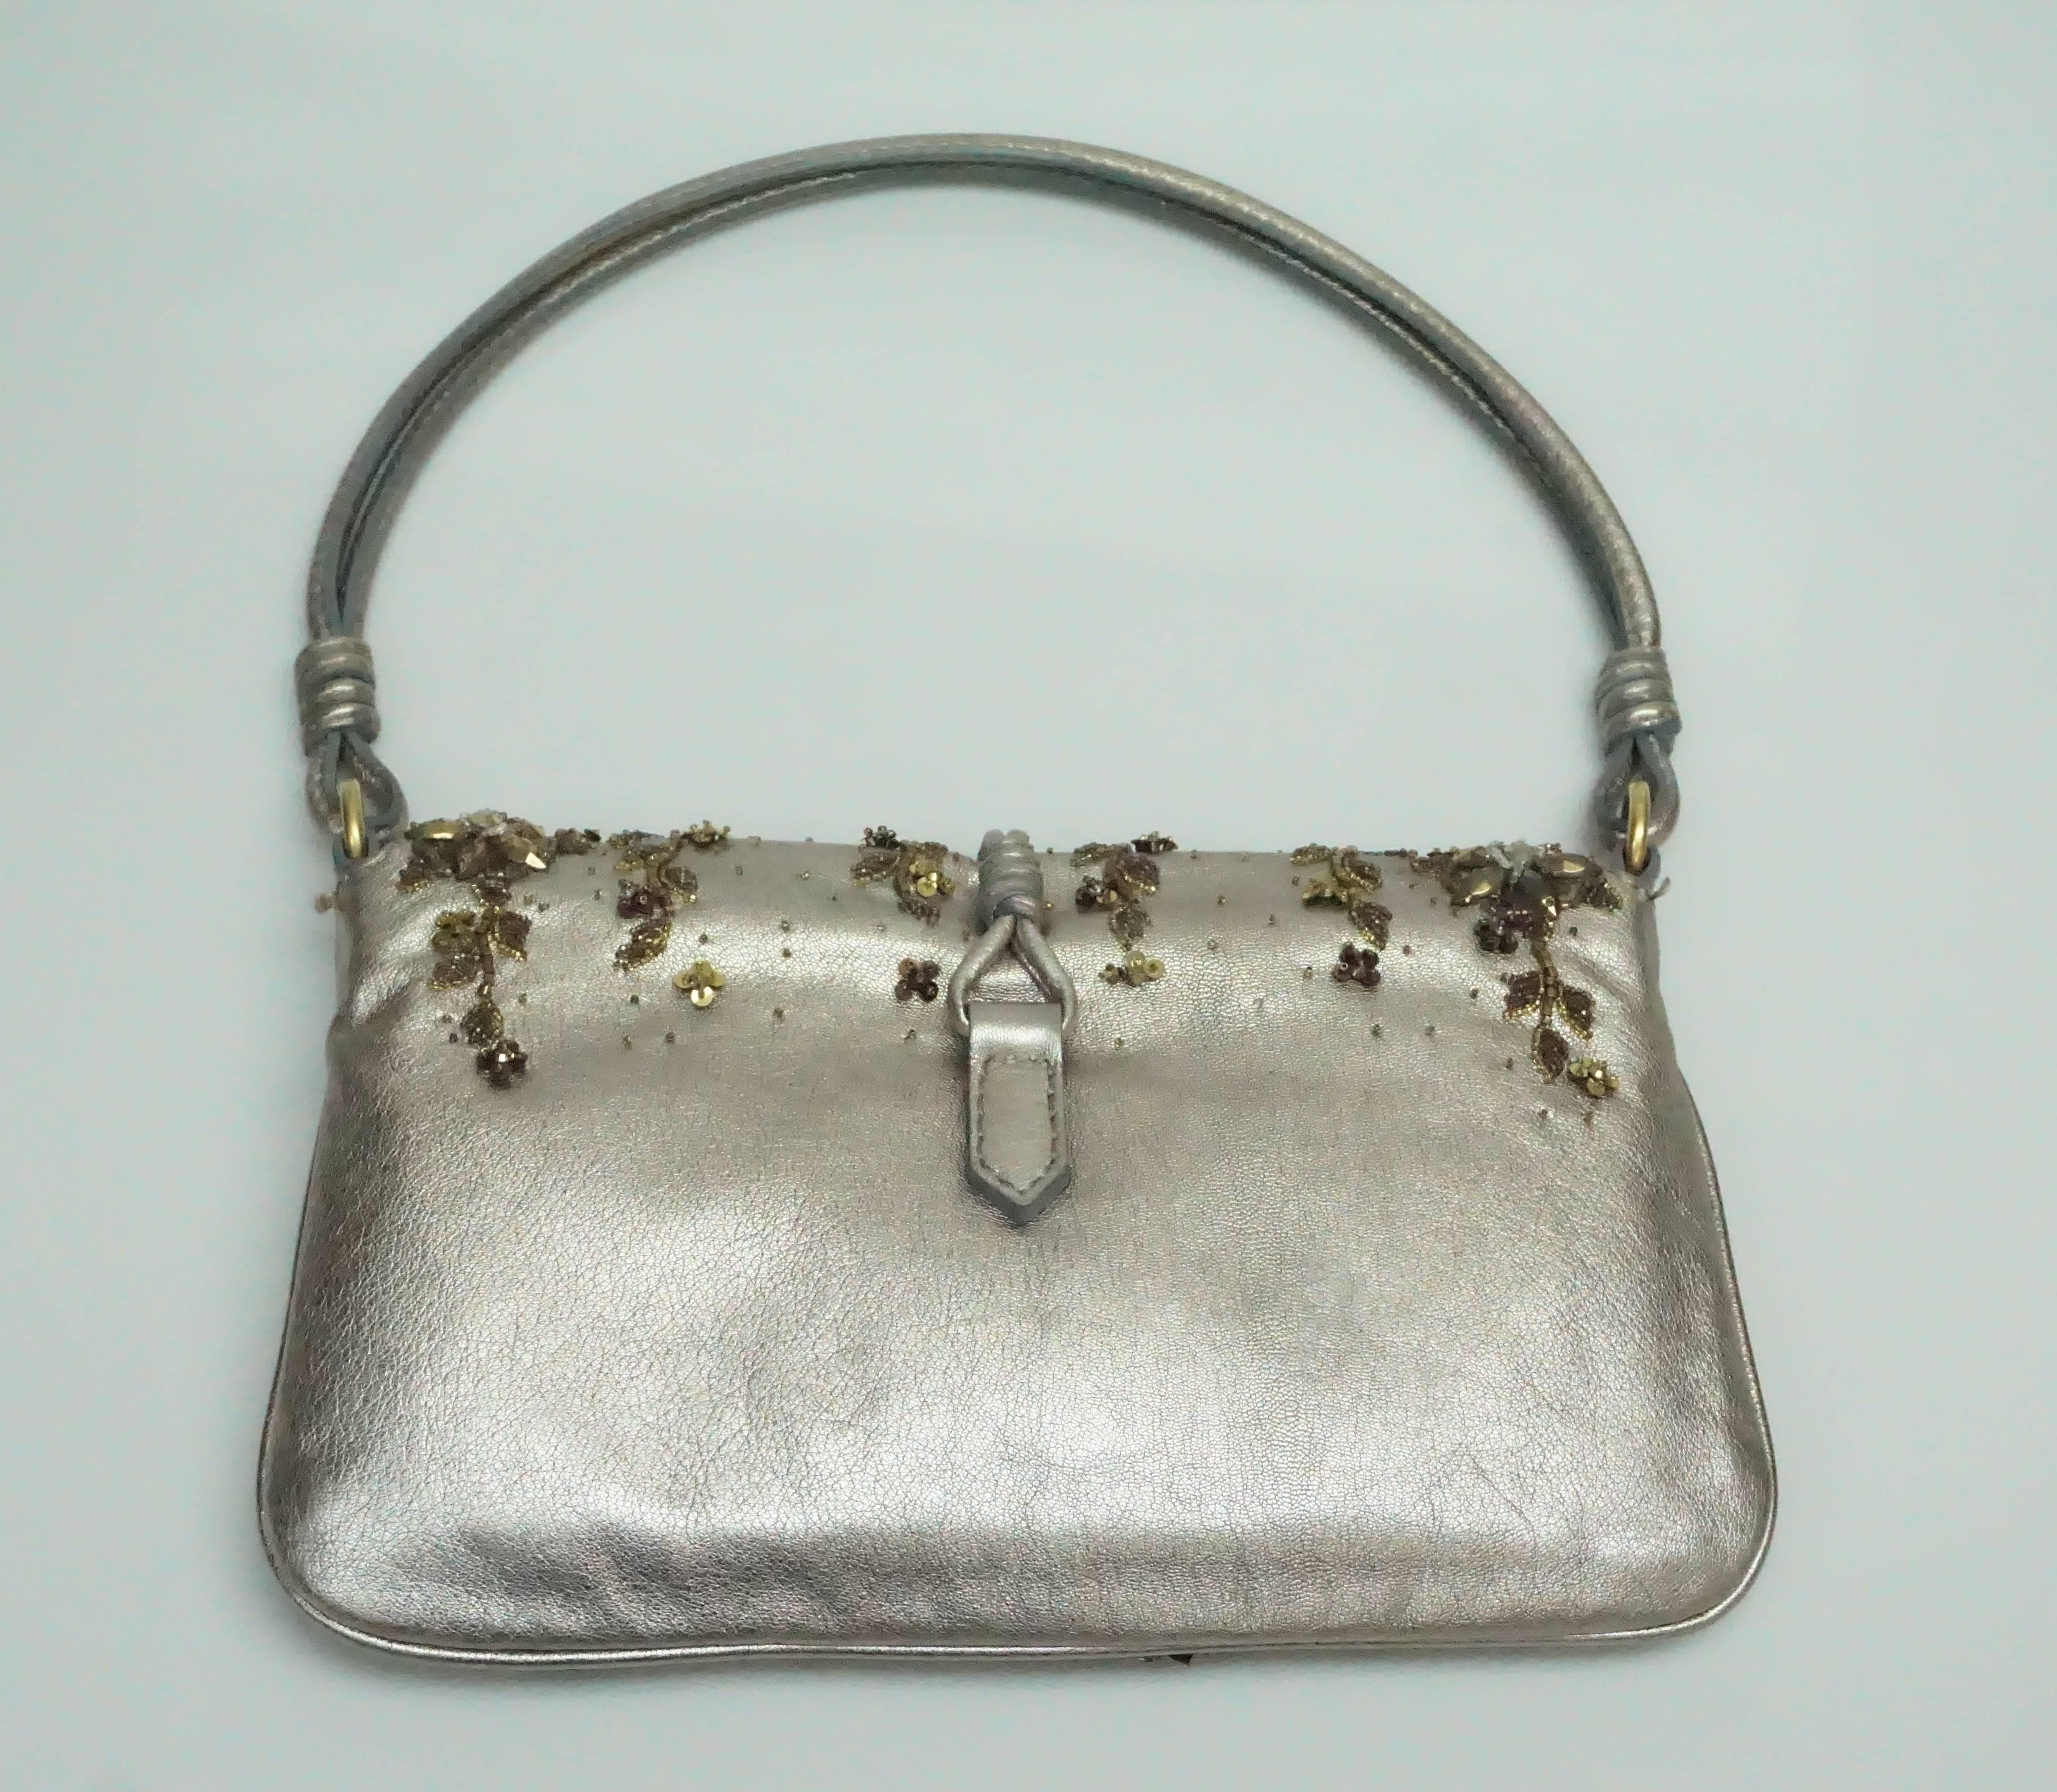 Valentino Beaded Gold and Bronze w/ Floral Embellishments  This gorgeous Valentino evening bag is in excellent condition. The bag has a slight flap with a heavy gold medallion of the Valentino logo attached to a string.  The front of the bag has